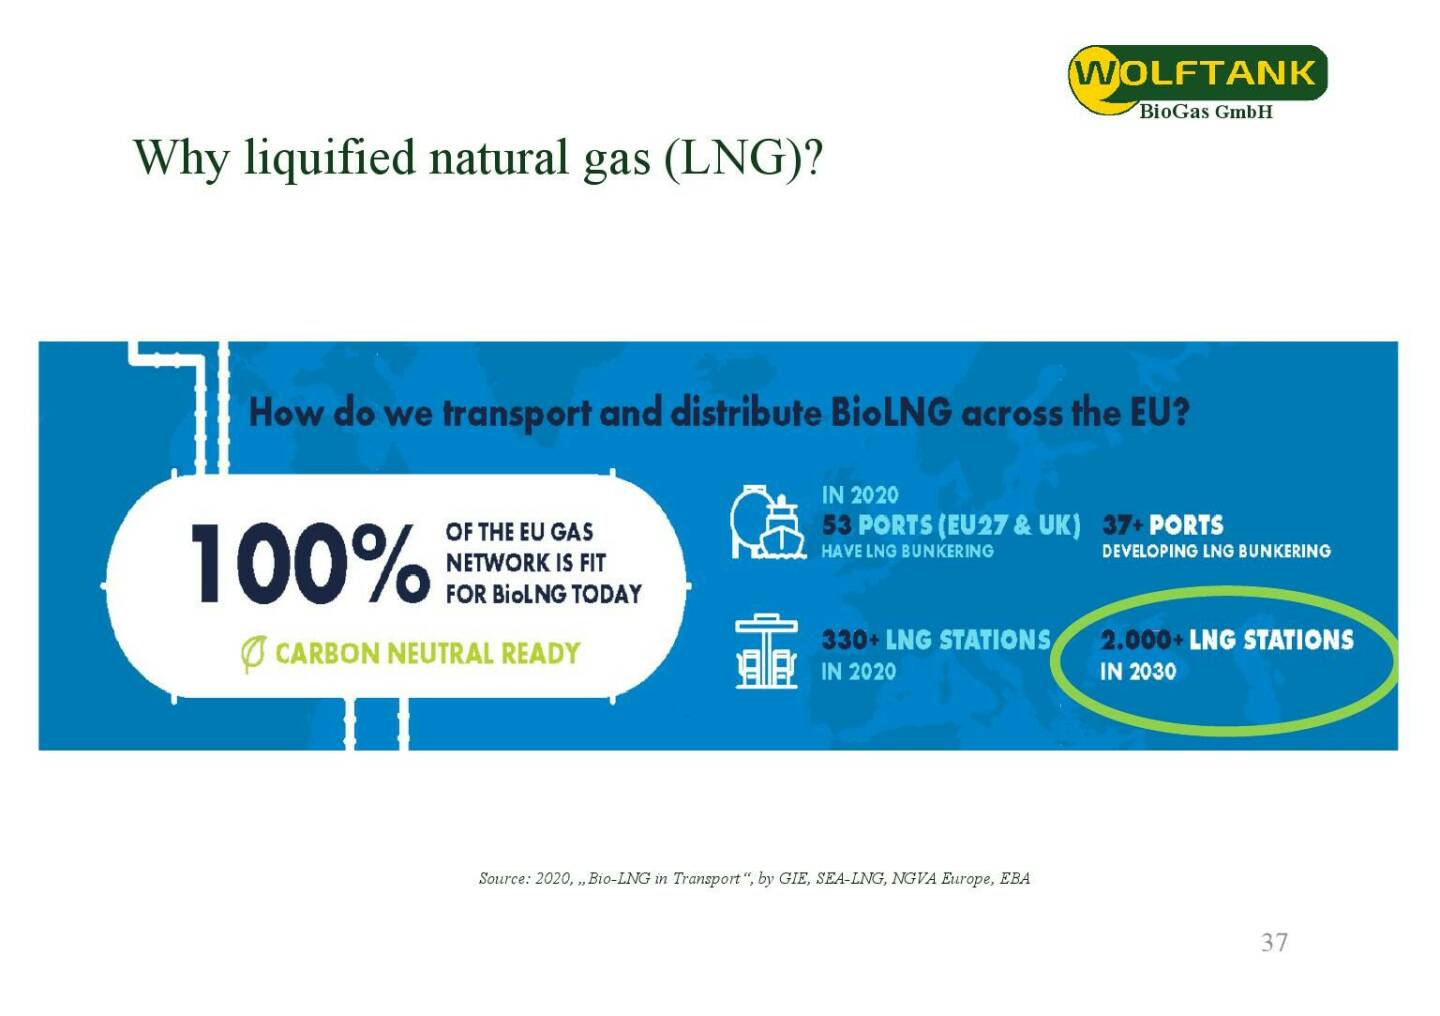 Wolftank - Why liquified natural gas (LNG)?